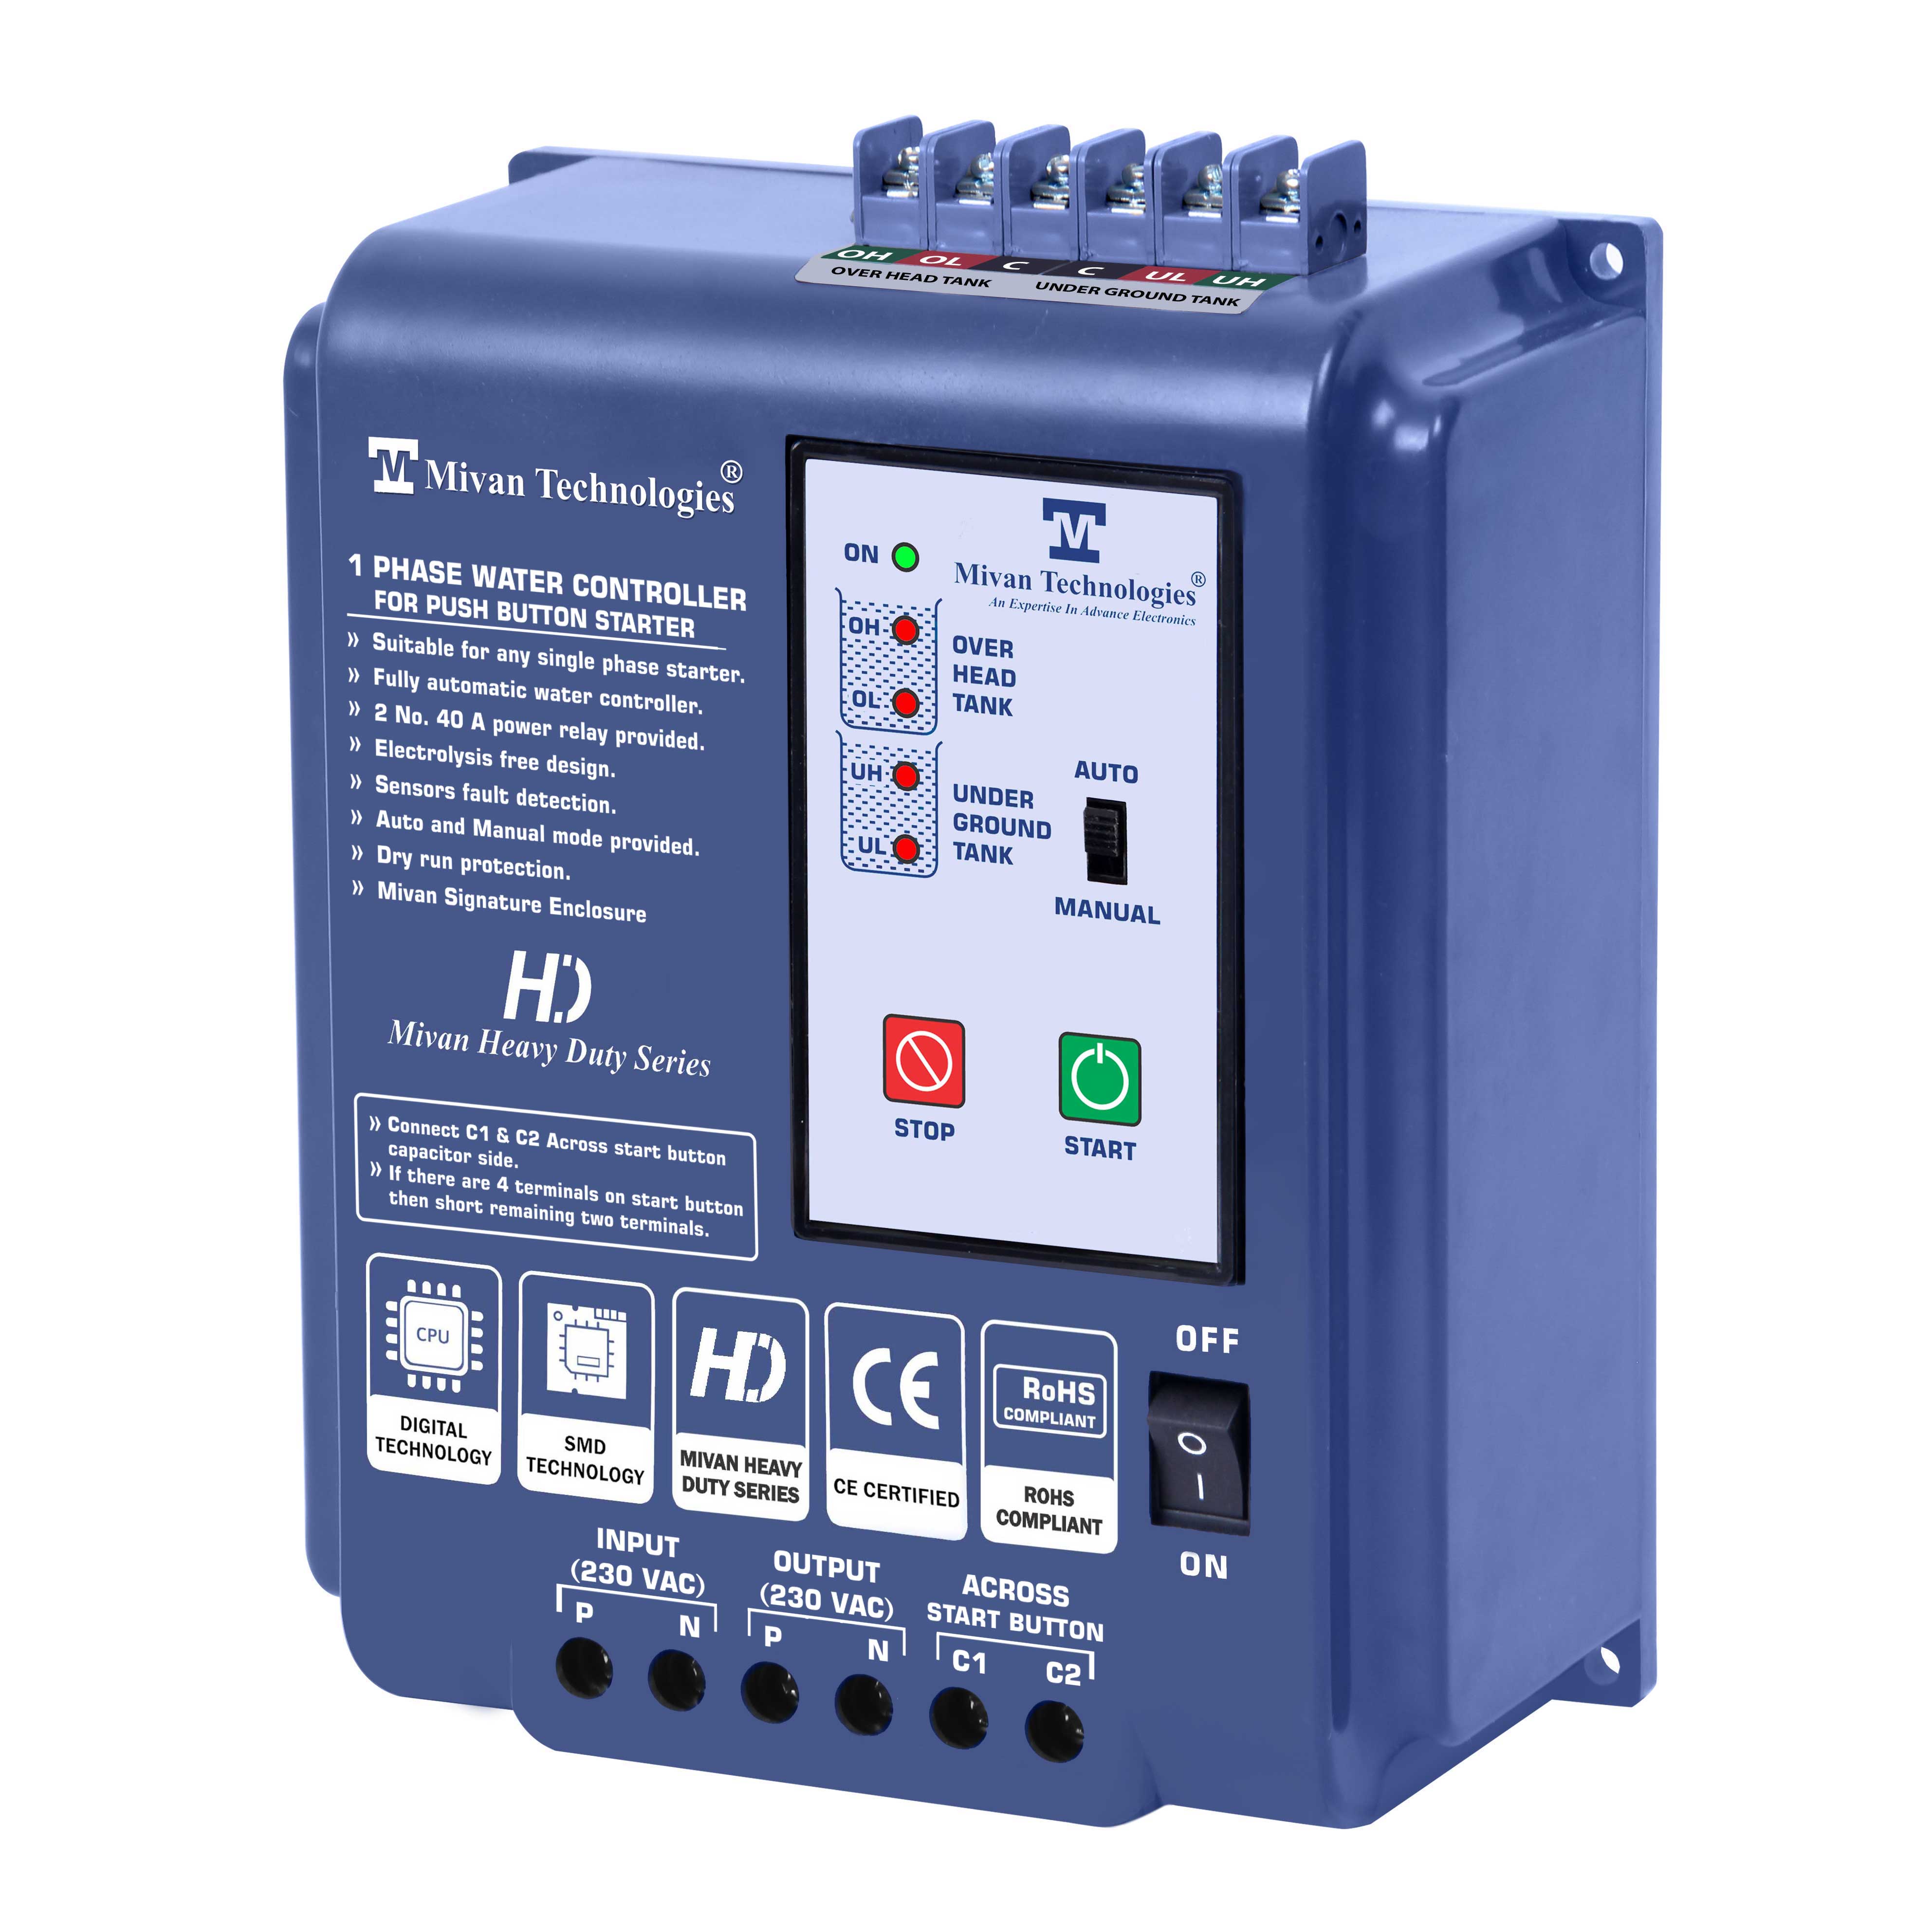 LLC 2 SR HD Water level controller for single phase push button type starter panel fully automatic with 6 sensors